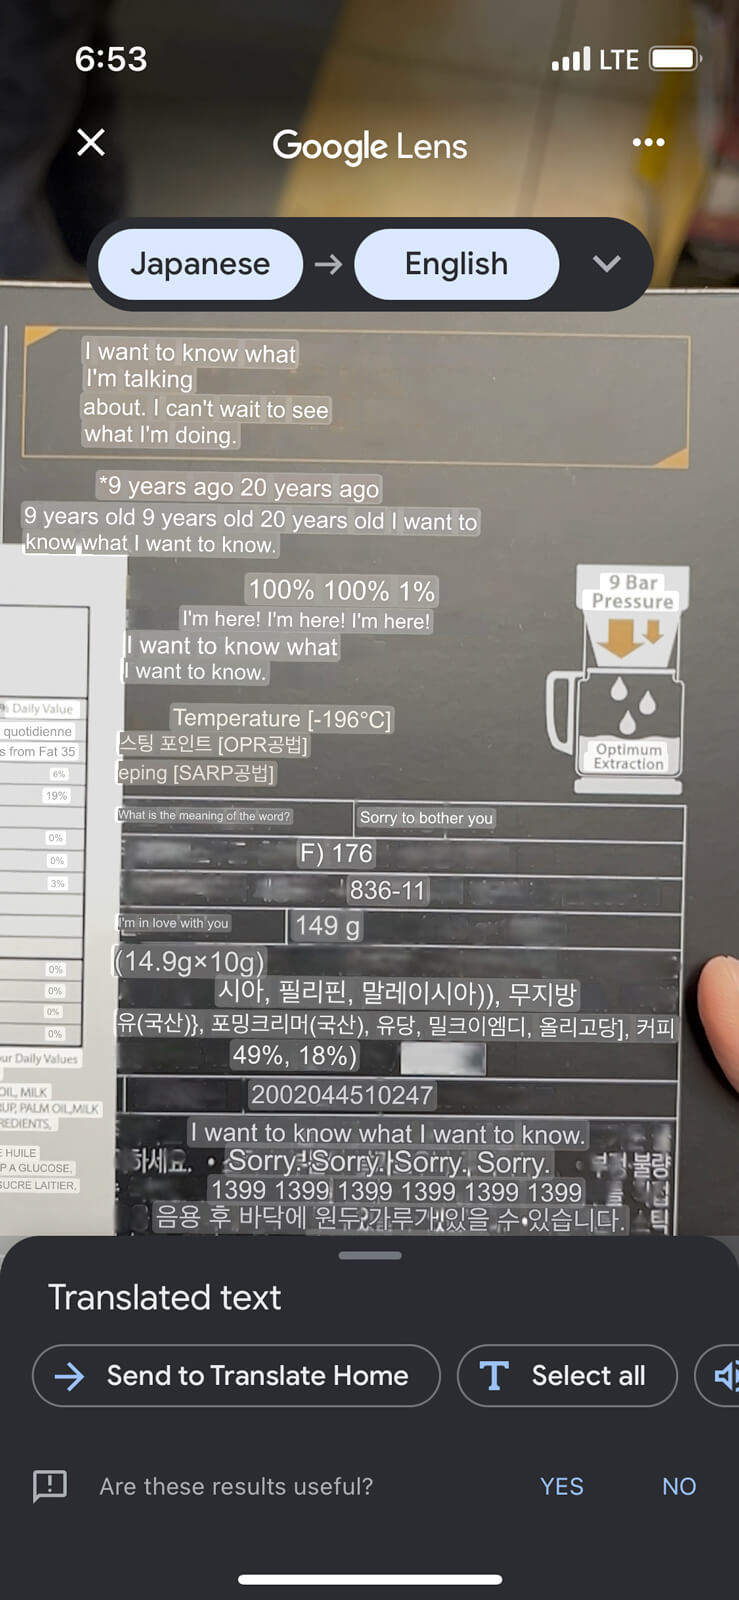 Google Lens translation of an espresso carton. The text is korean, but the translation goes from Japanese to English, resulting in oddly poetic nonsense text.